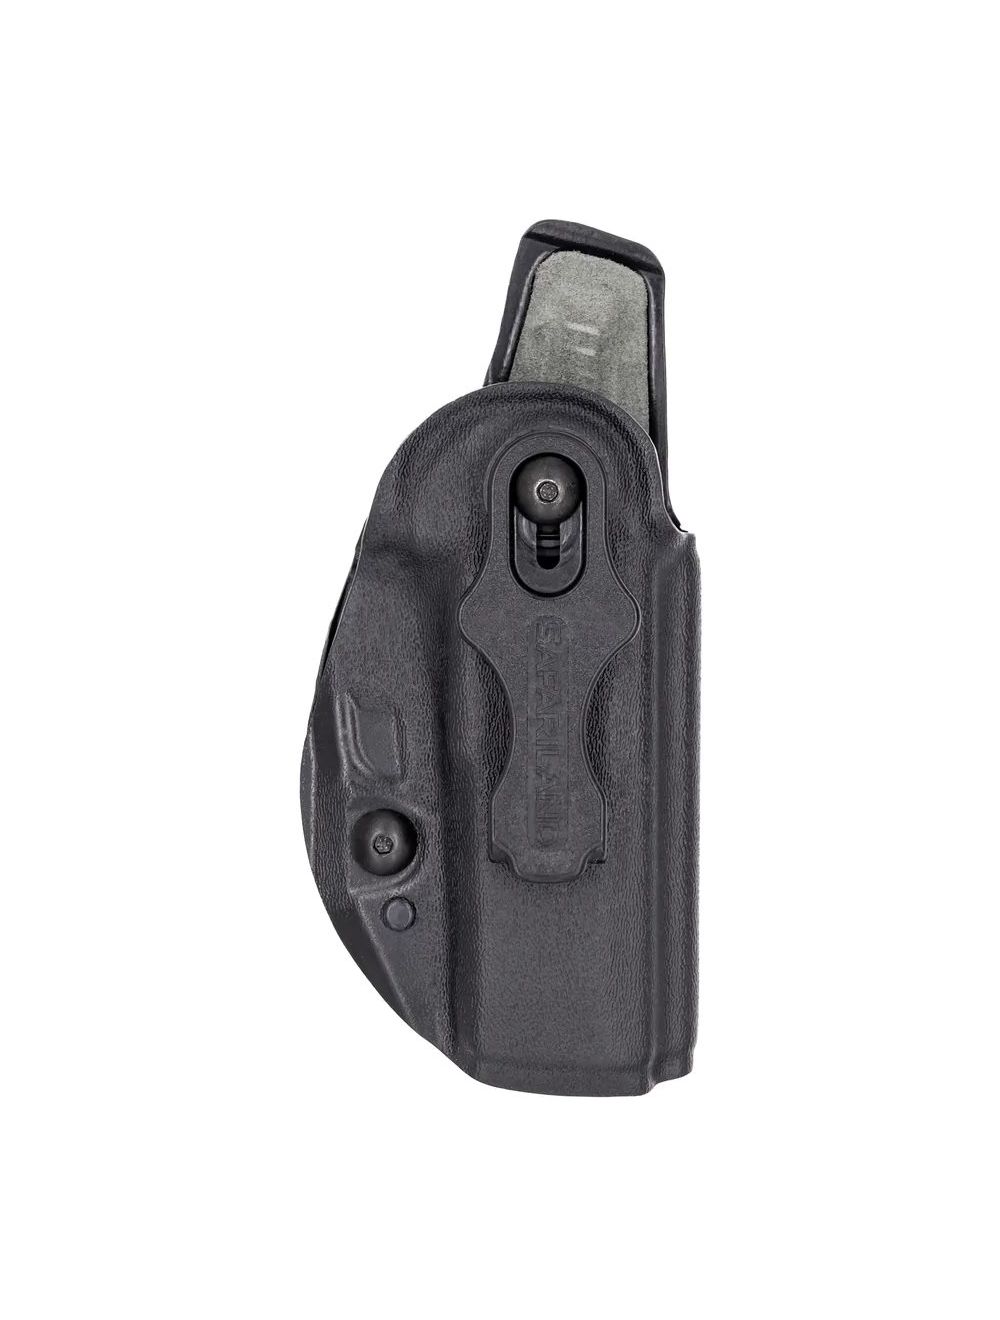 Species IWB Holster for Smith & Wesson Shield Plus